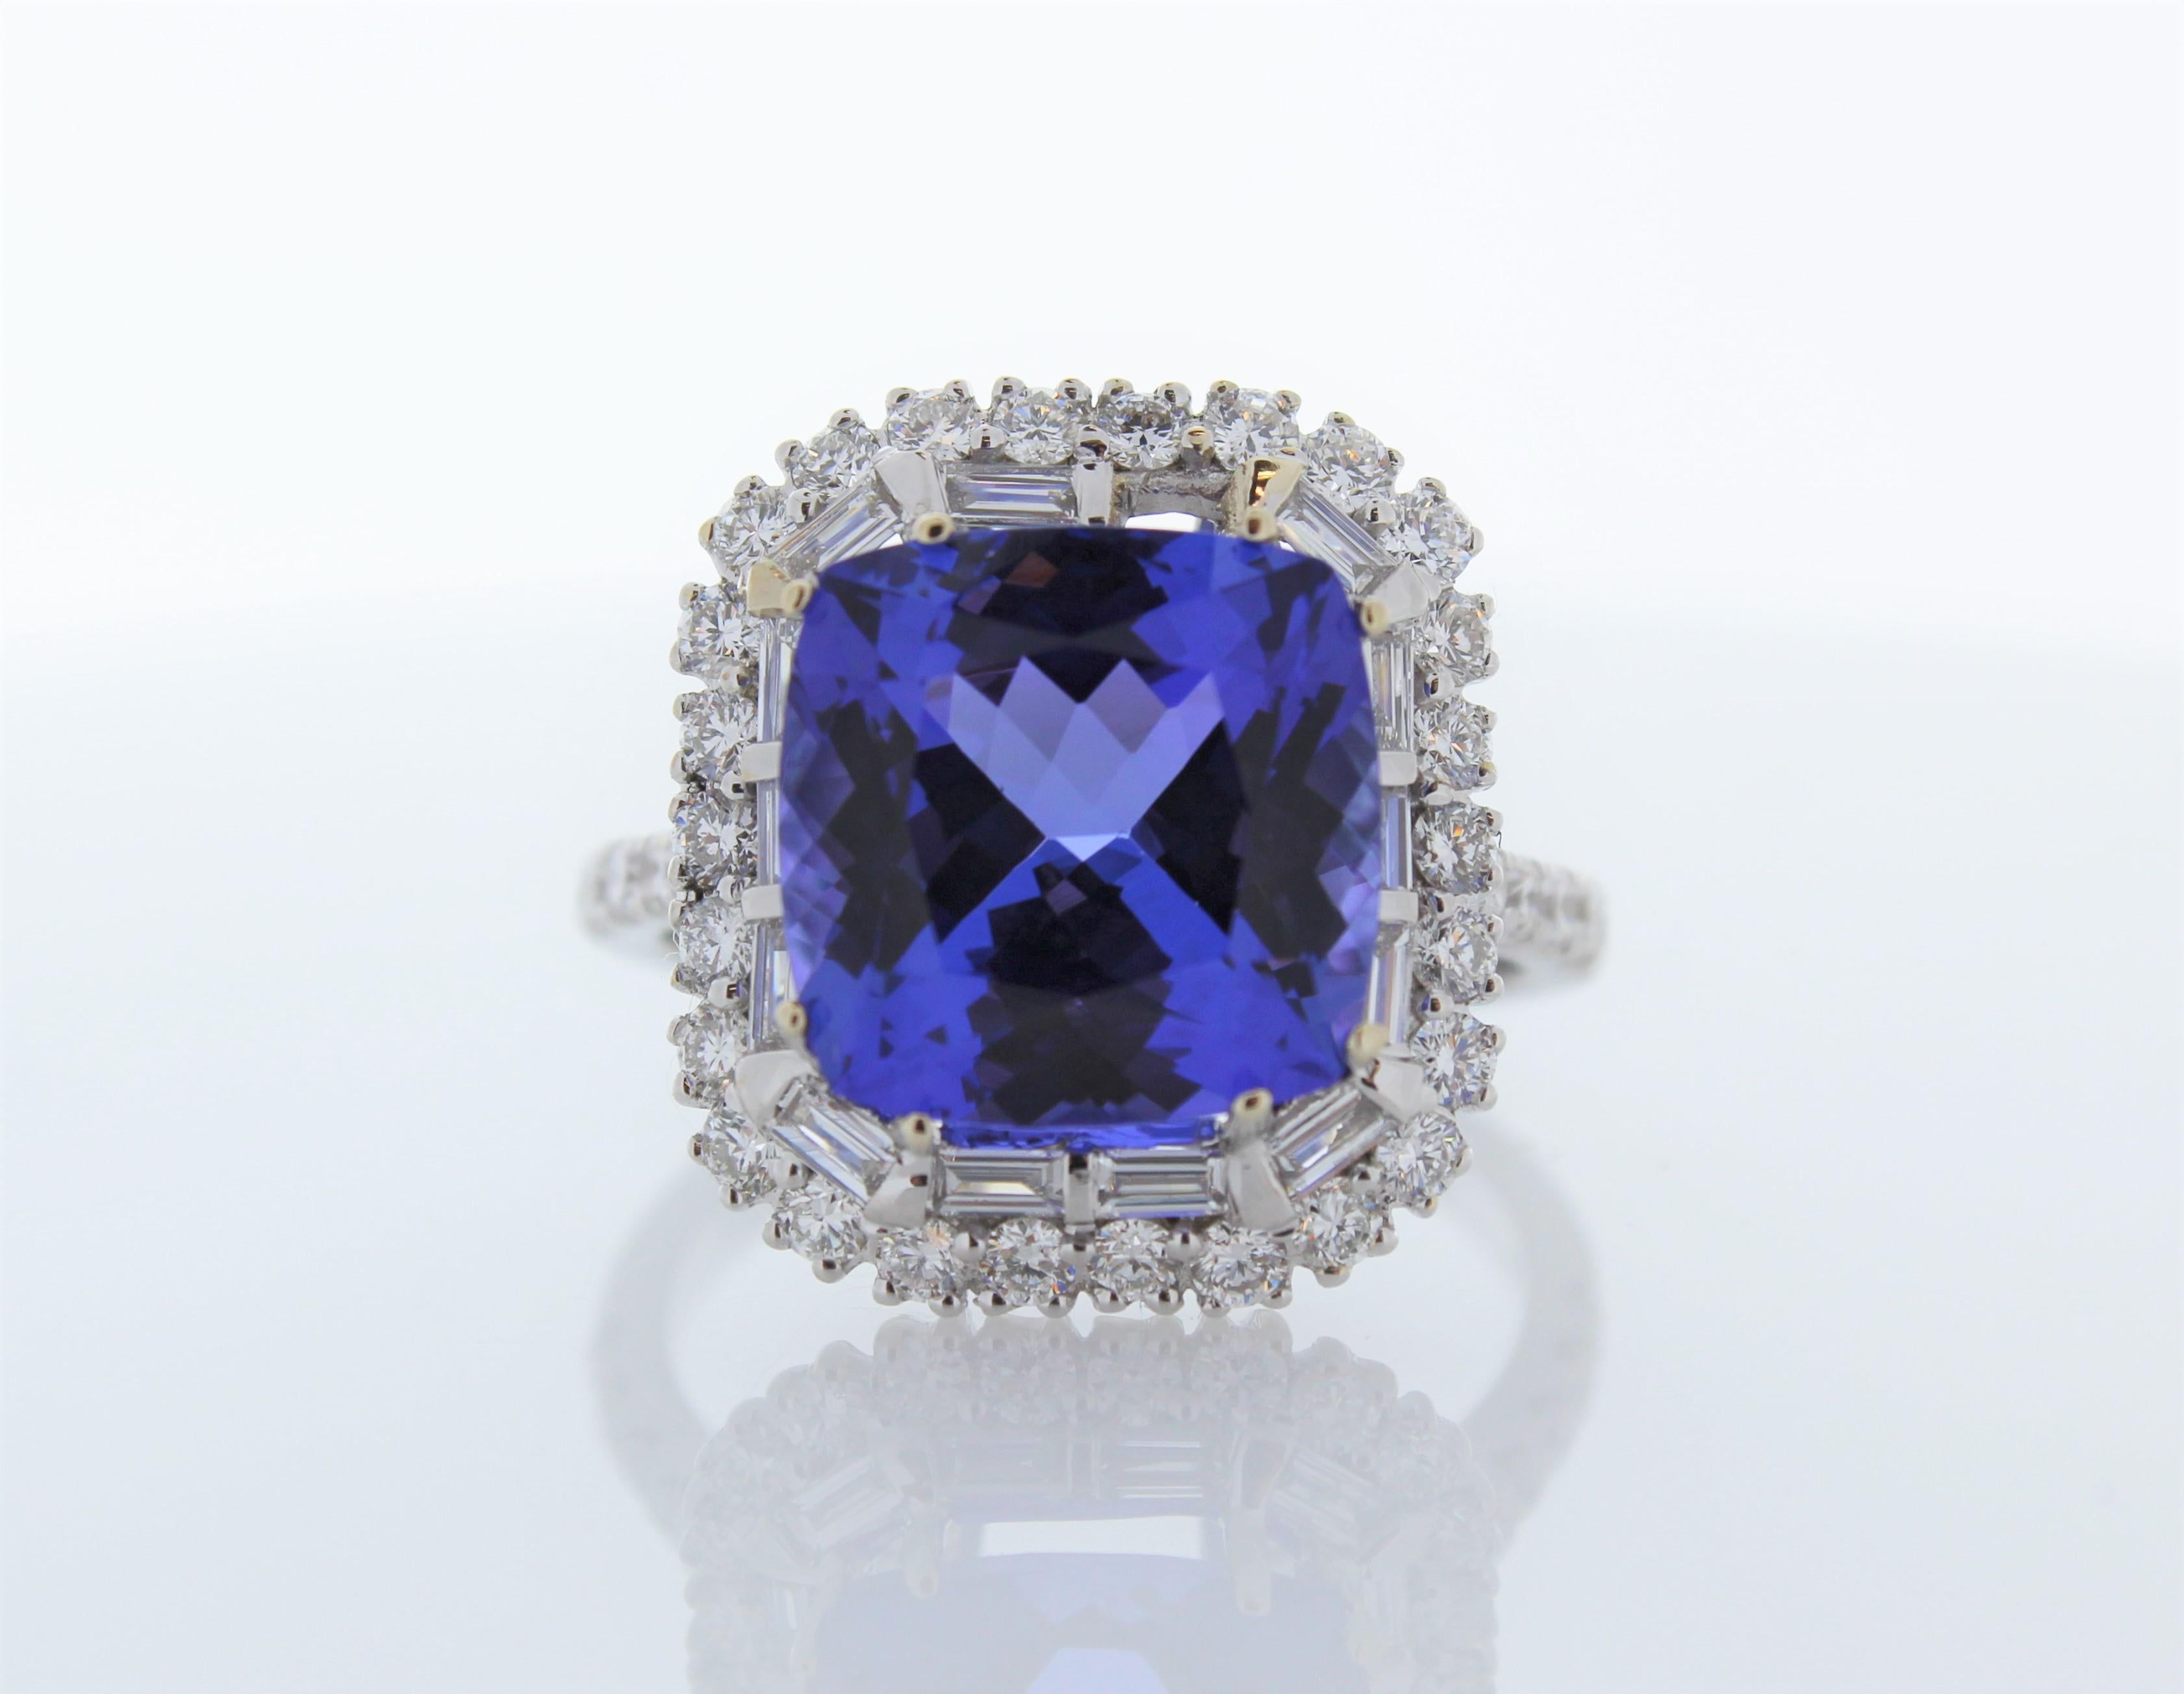 This is a cocktail ring that showcases a 6.09 carat cushion cut tanzanite. It has diamonds on the band and around the gemstone totaling 1.20 carats. Designed in brightly polished 18 K gold, this gorgeous ring exudes sophistication and individual